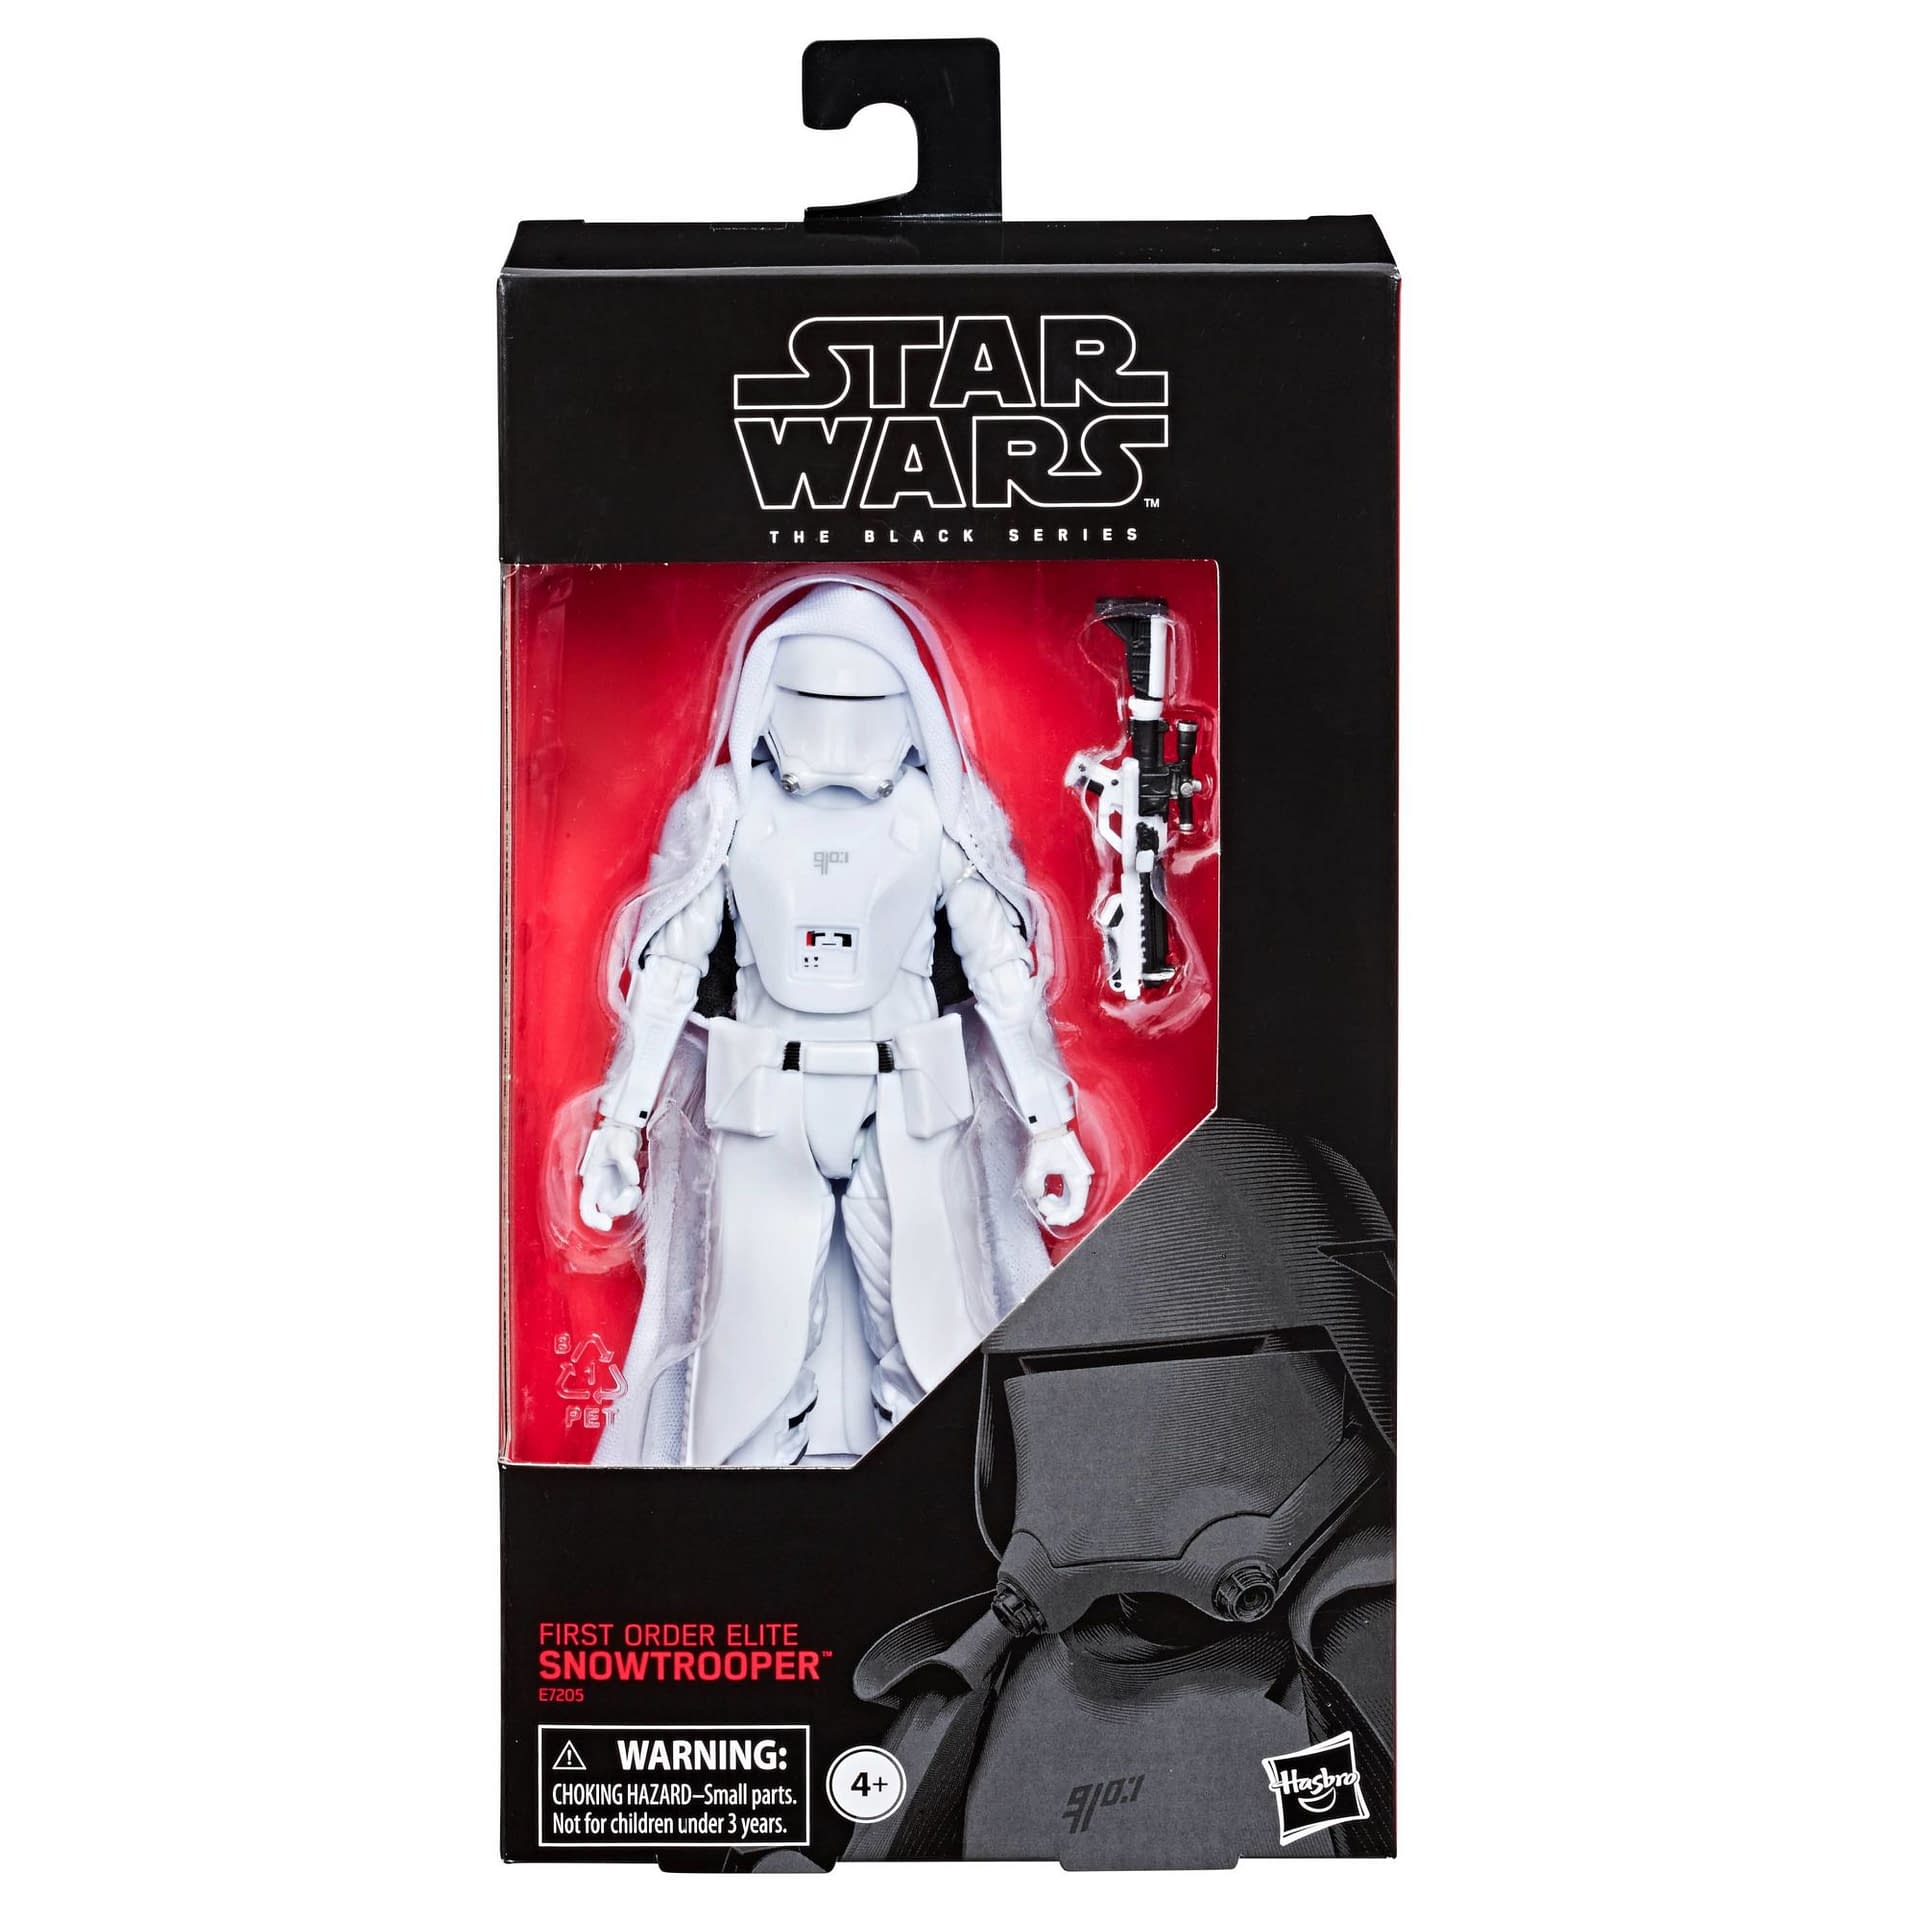 New Stormtroopers Join The Ranks for Triple Force Friday 